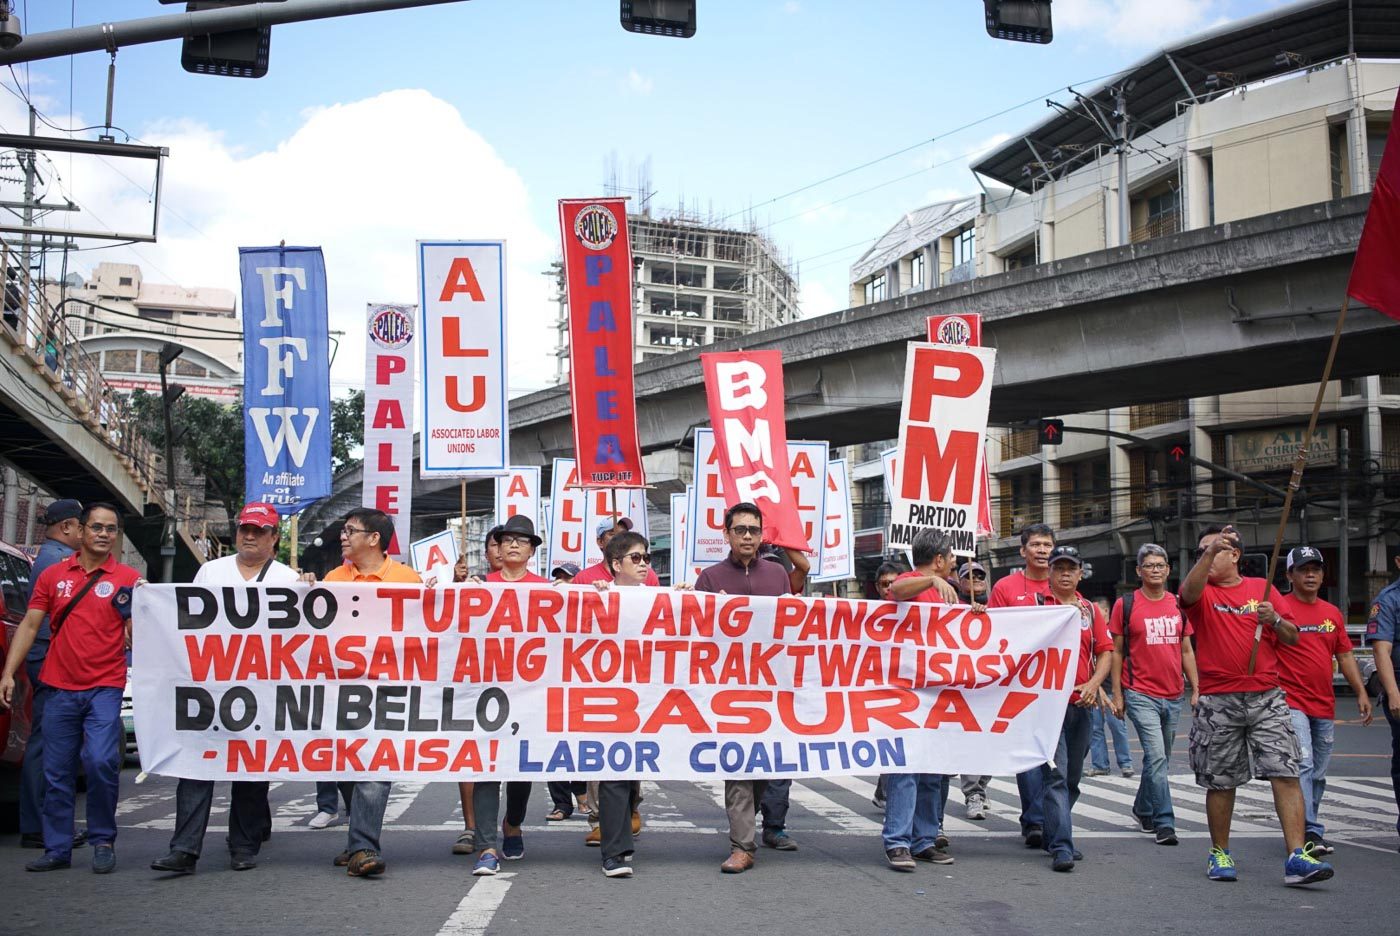 No ‘endo’ in 2017? Challenge of ending labor contractualization